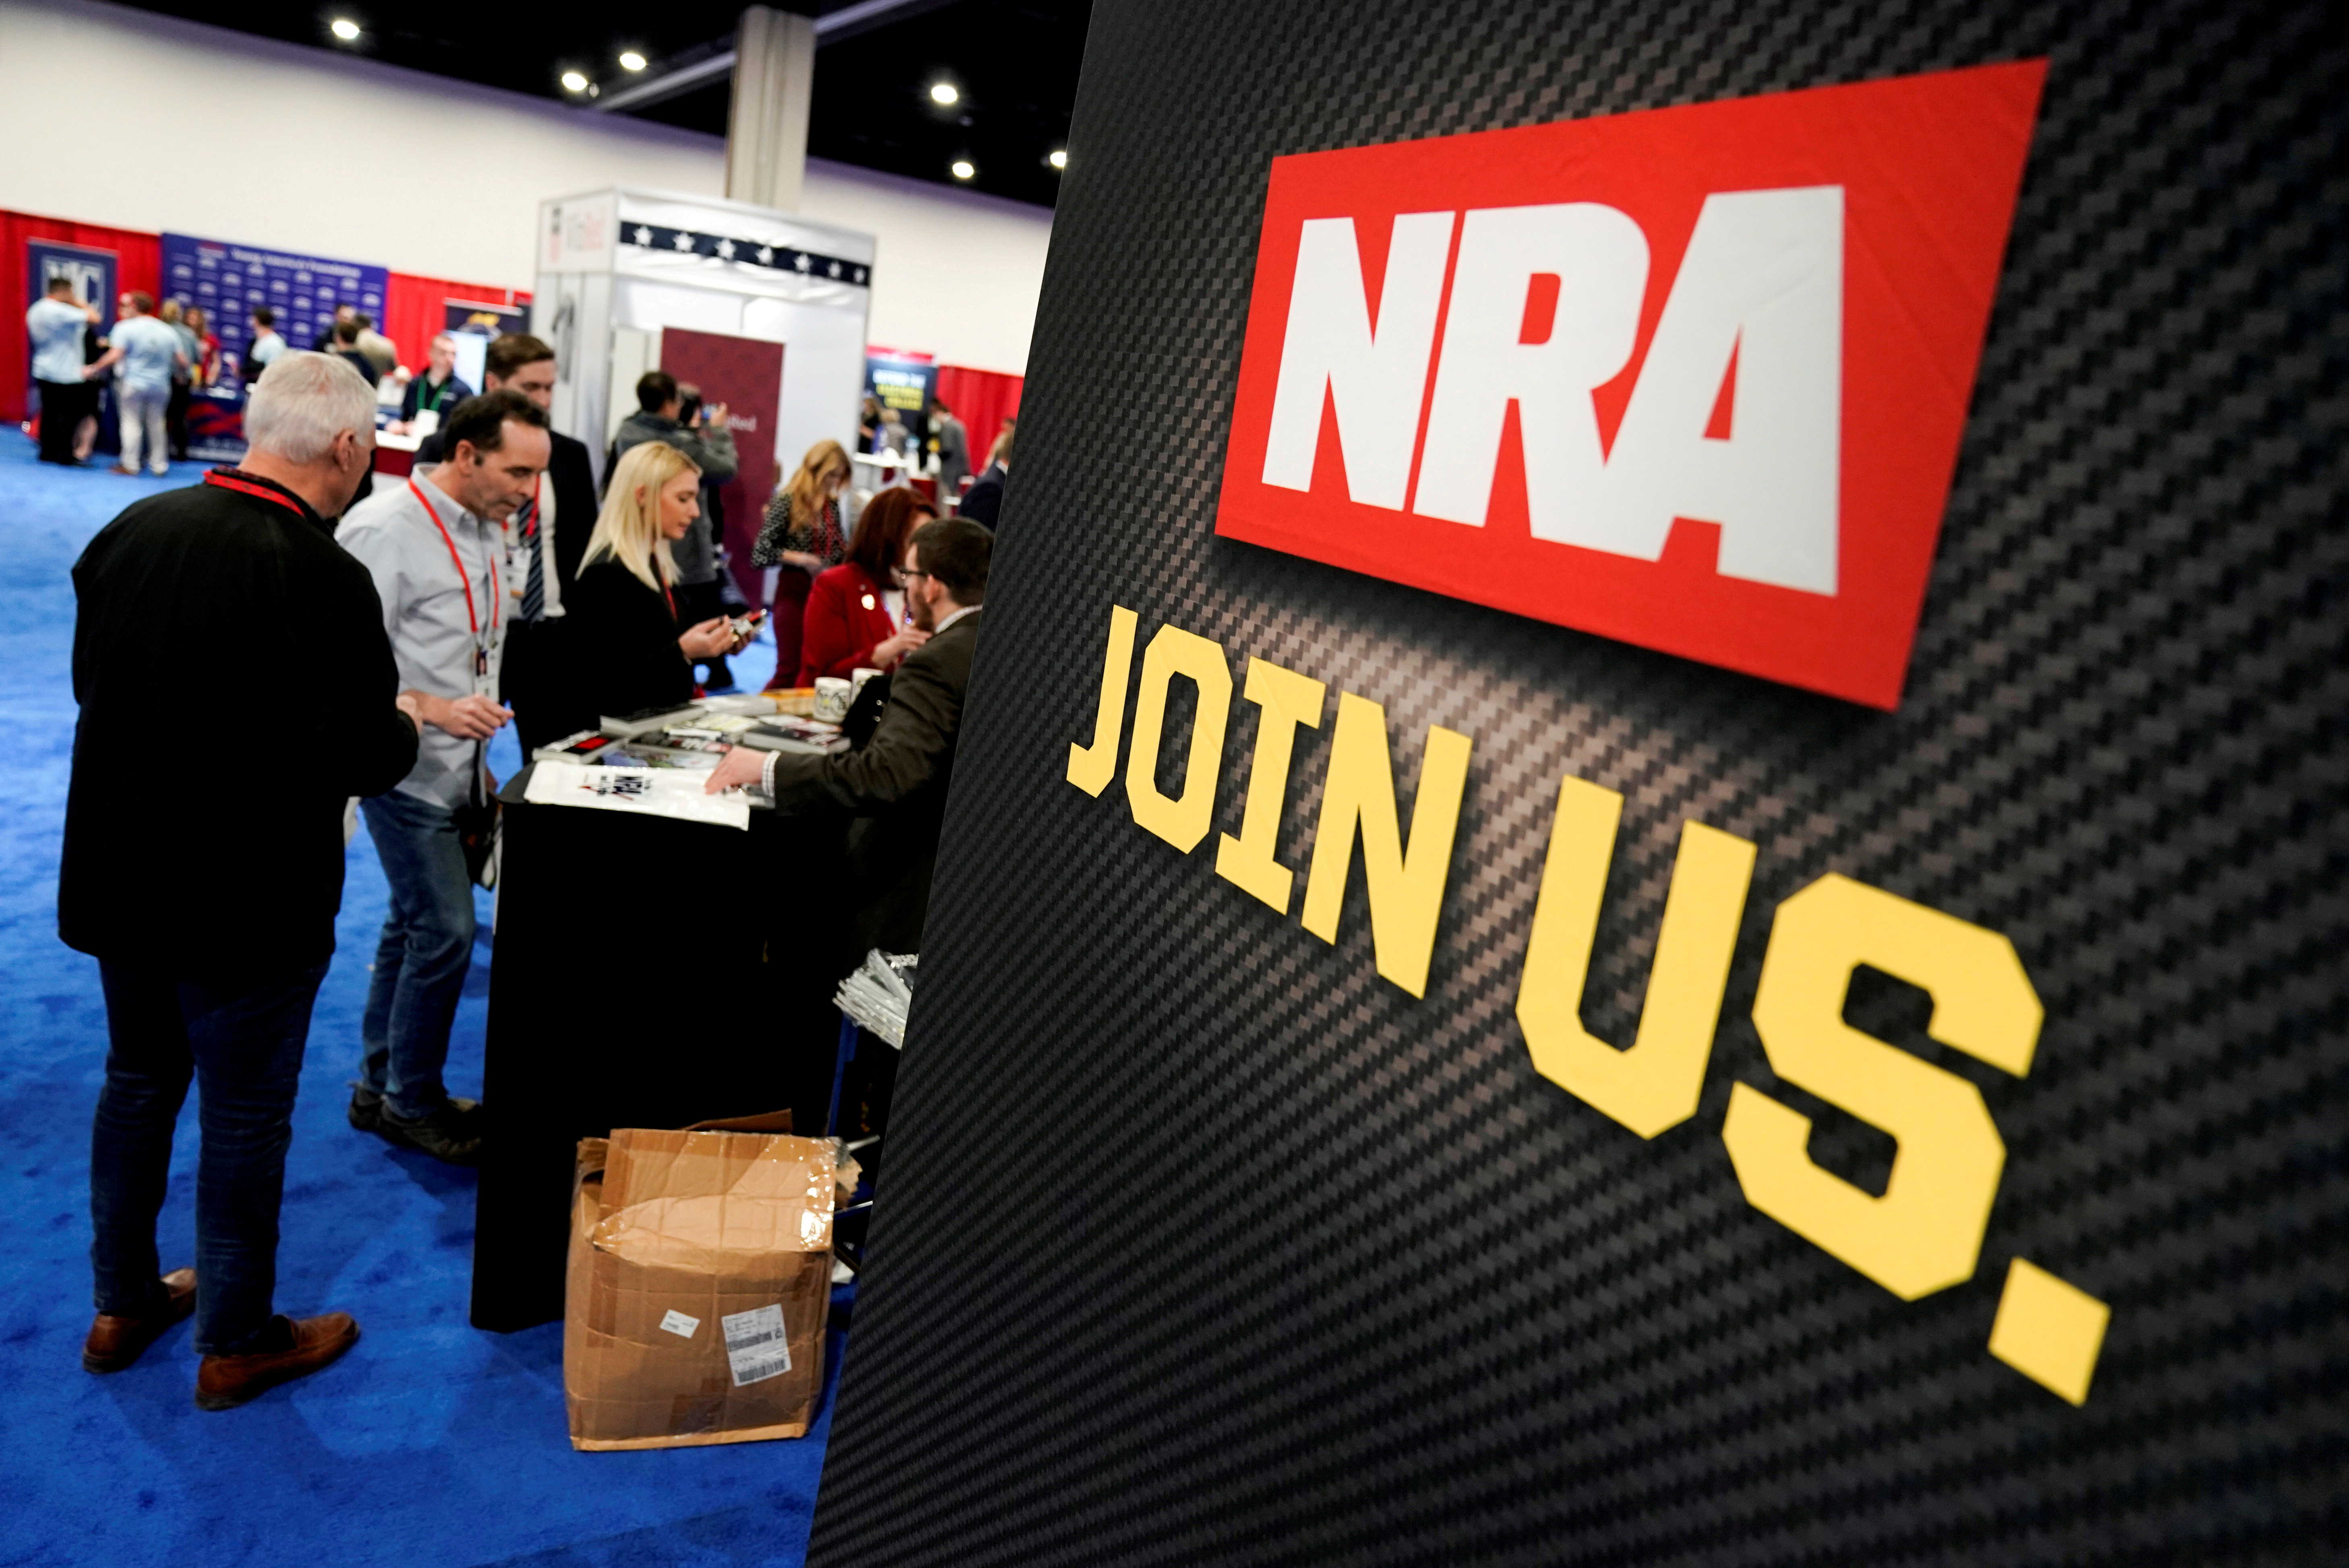 Attendees sign up at the National Rifle Association booth at the Conservative Political Action Conference in Oxon Hill, Maryland